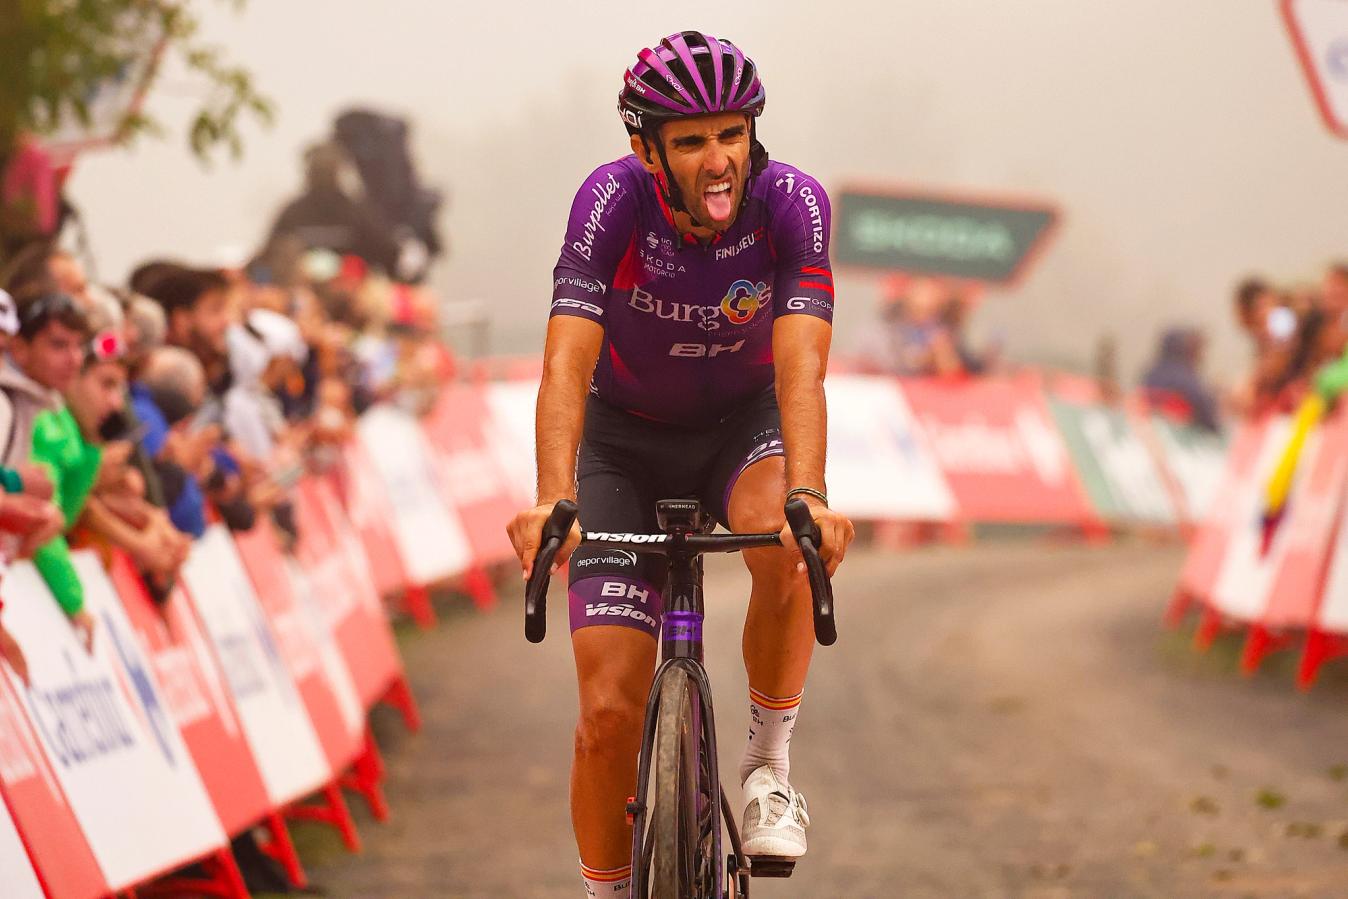 Stage 9 was another in a long list of tough days at this year's Vuelta a España